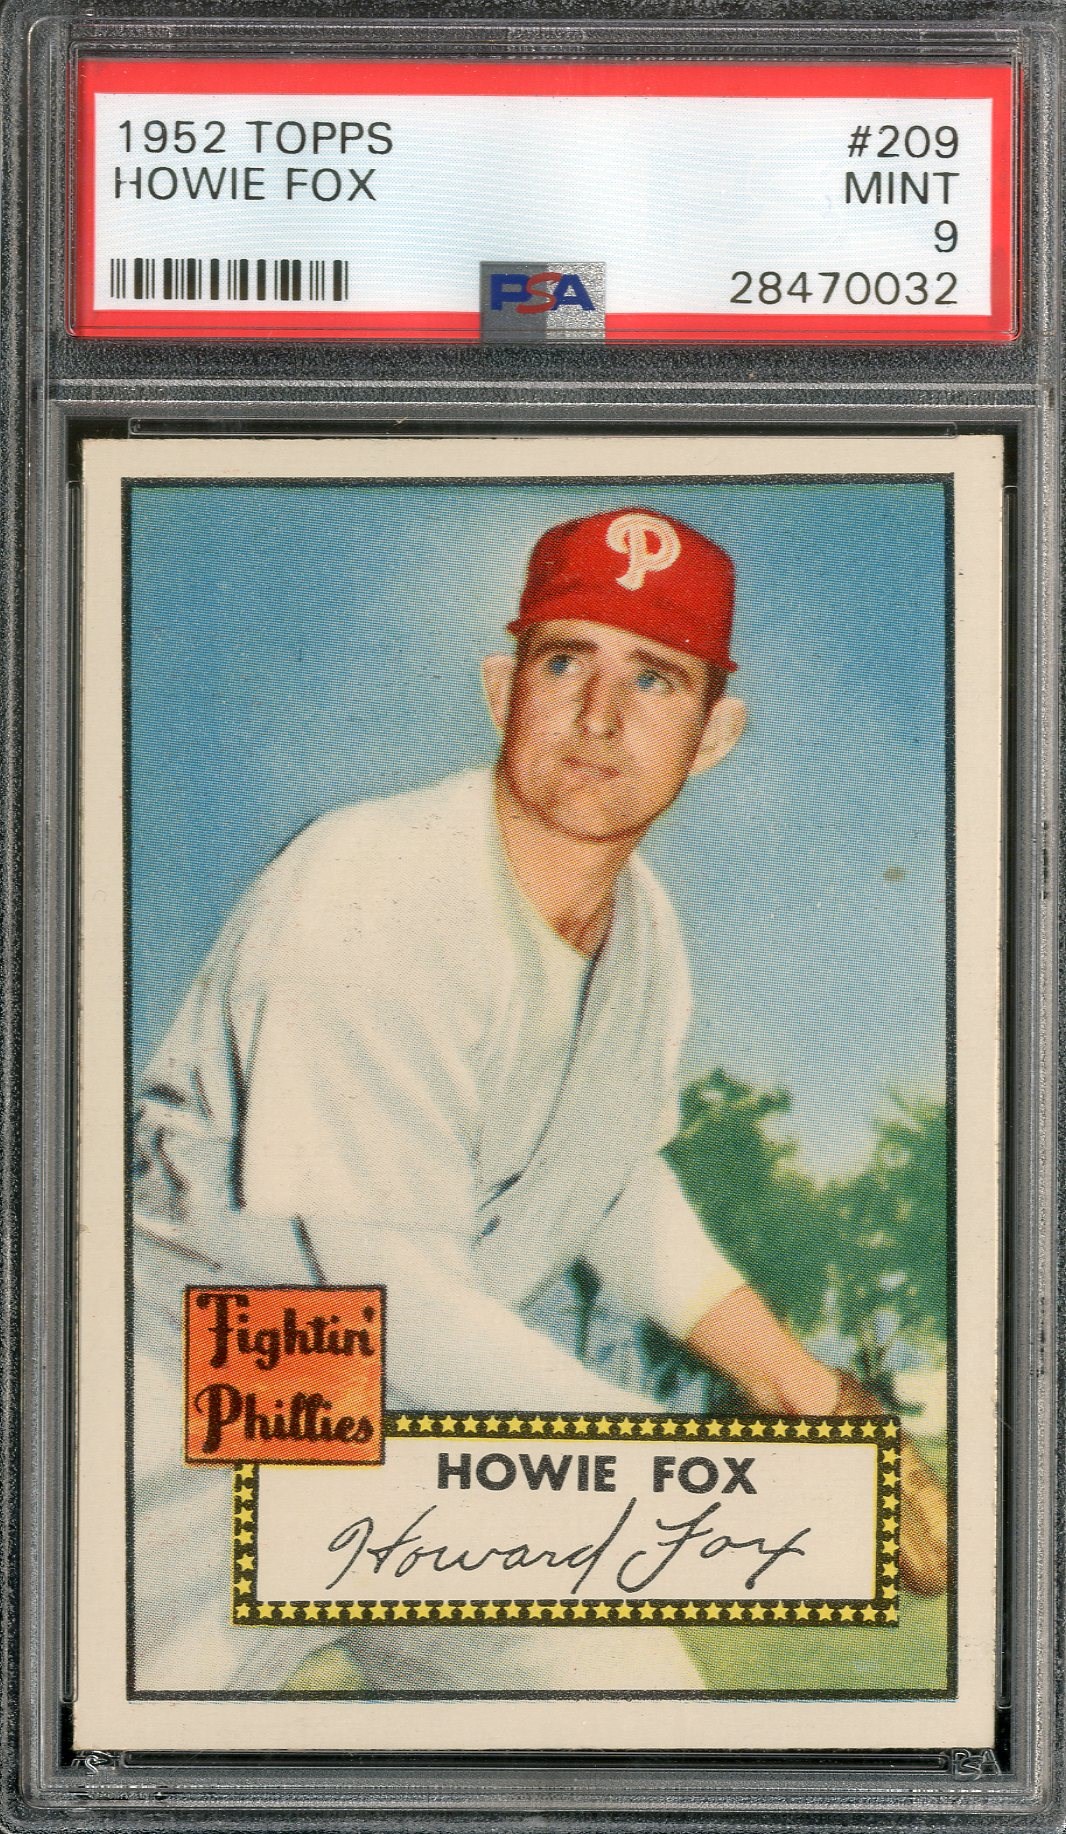 Baseball and Trading Cards - 1952 Topps #209 Howie Fox - PSA MINT 9